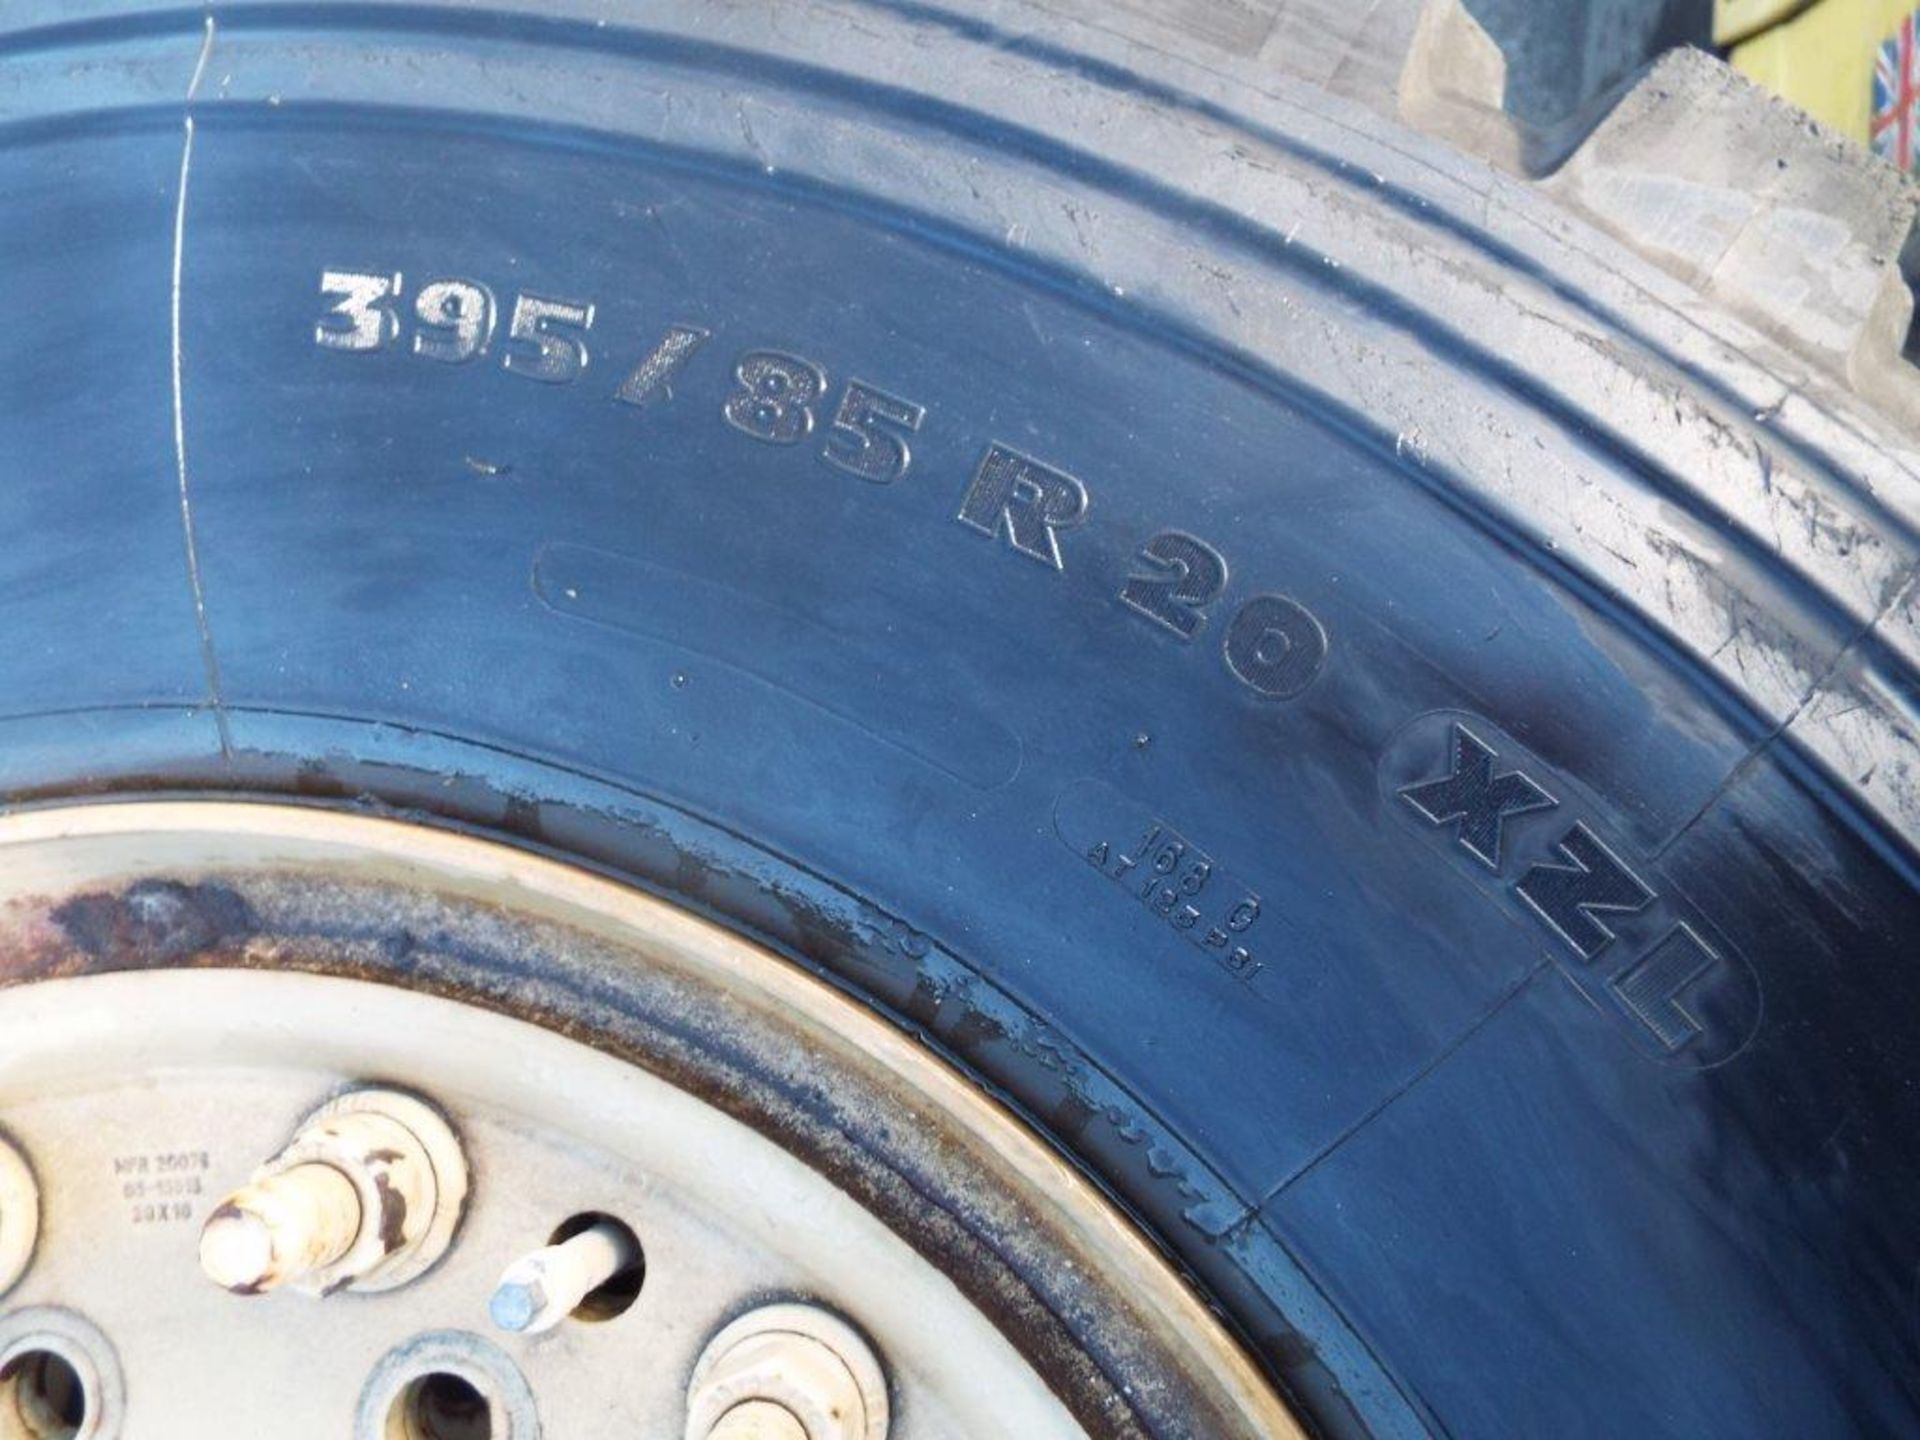 4 x Michelin XZL 395/85 R20 Tyres with 12 Stud Rims - Image 6 of 8